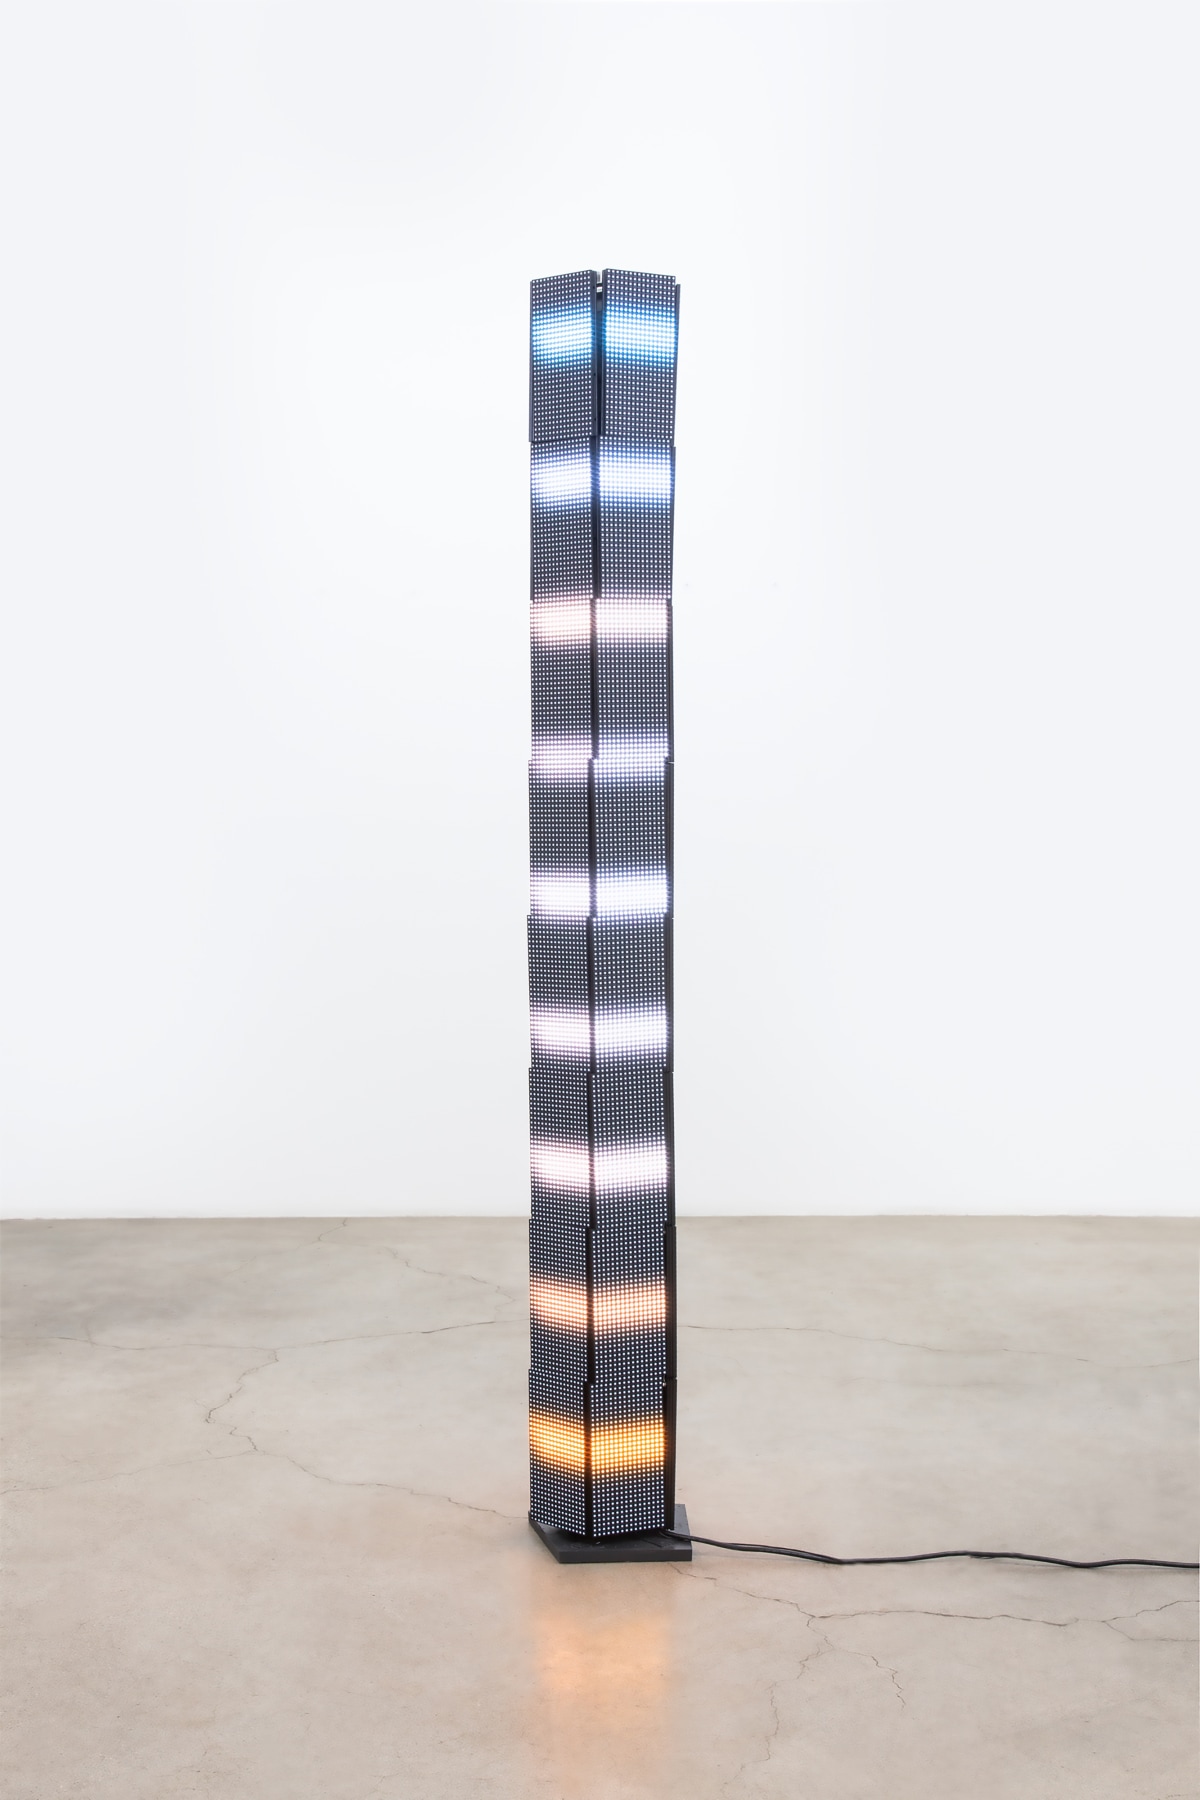 Luke Murphy, Lord Kelvin Column with 5 sides and 9 lights, 2020